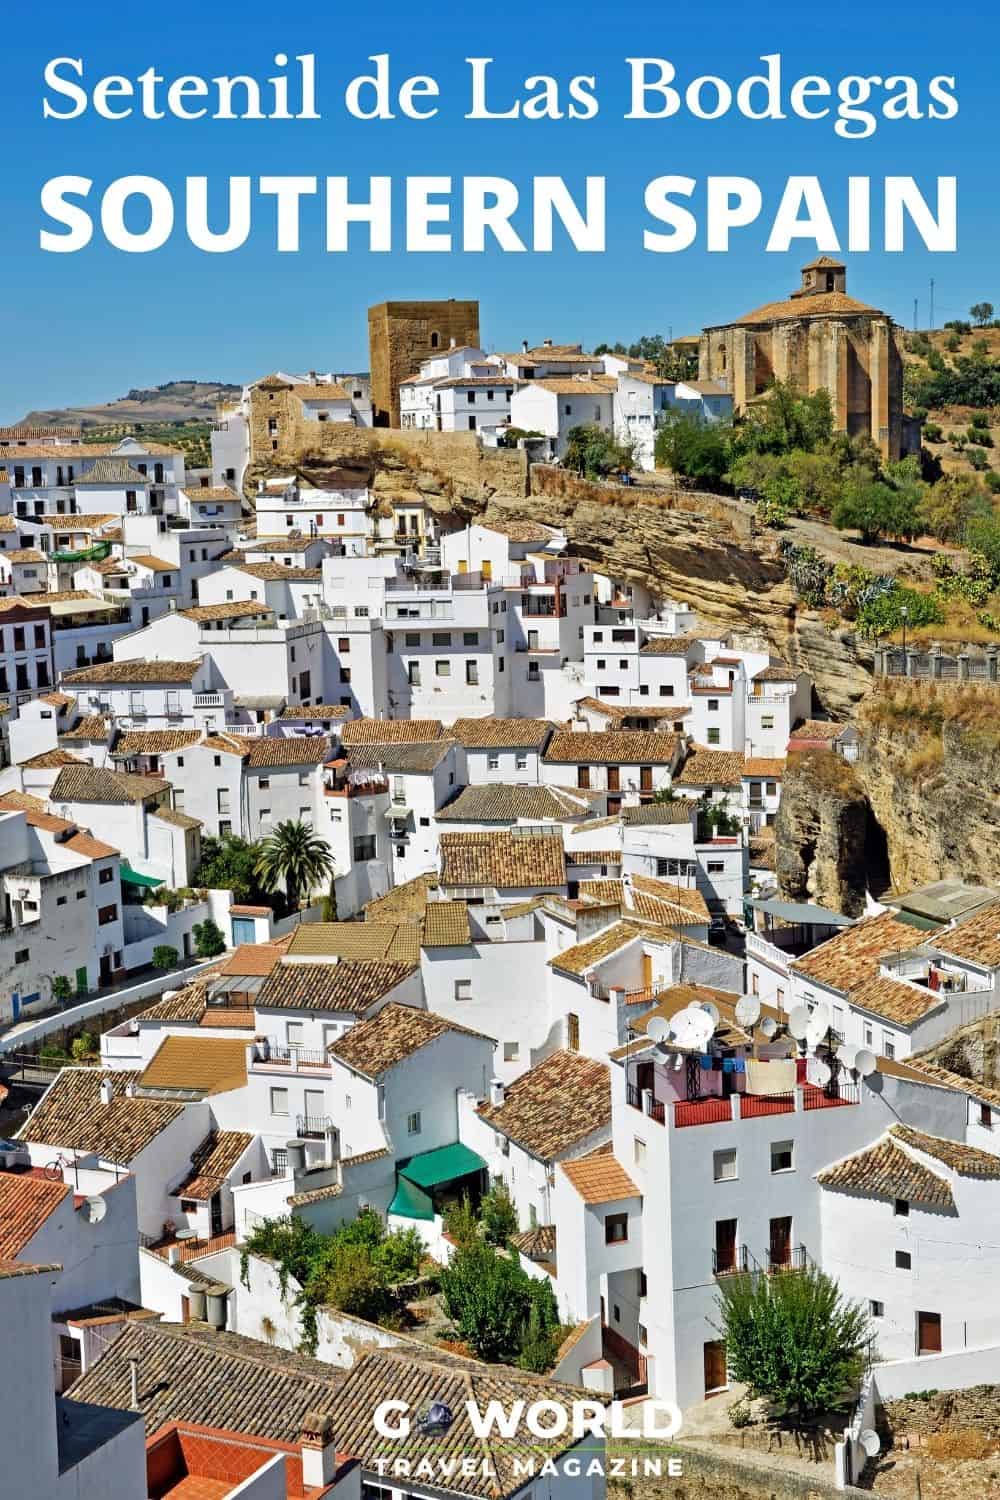 Setenil de las Bodegas, a small town built into the cliffs in Southern Spain. Learn about the sights in this charming and unique little town. #southernspain #setenildelasbodegasspain